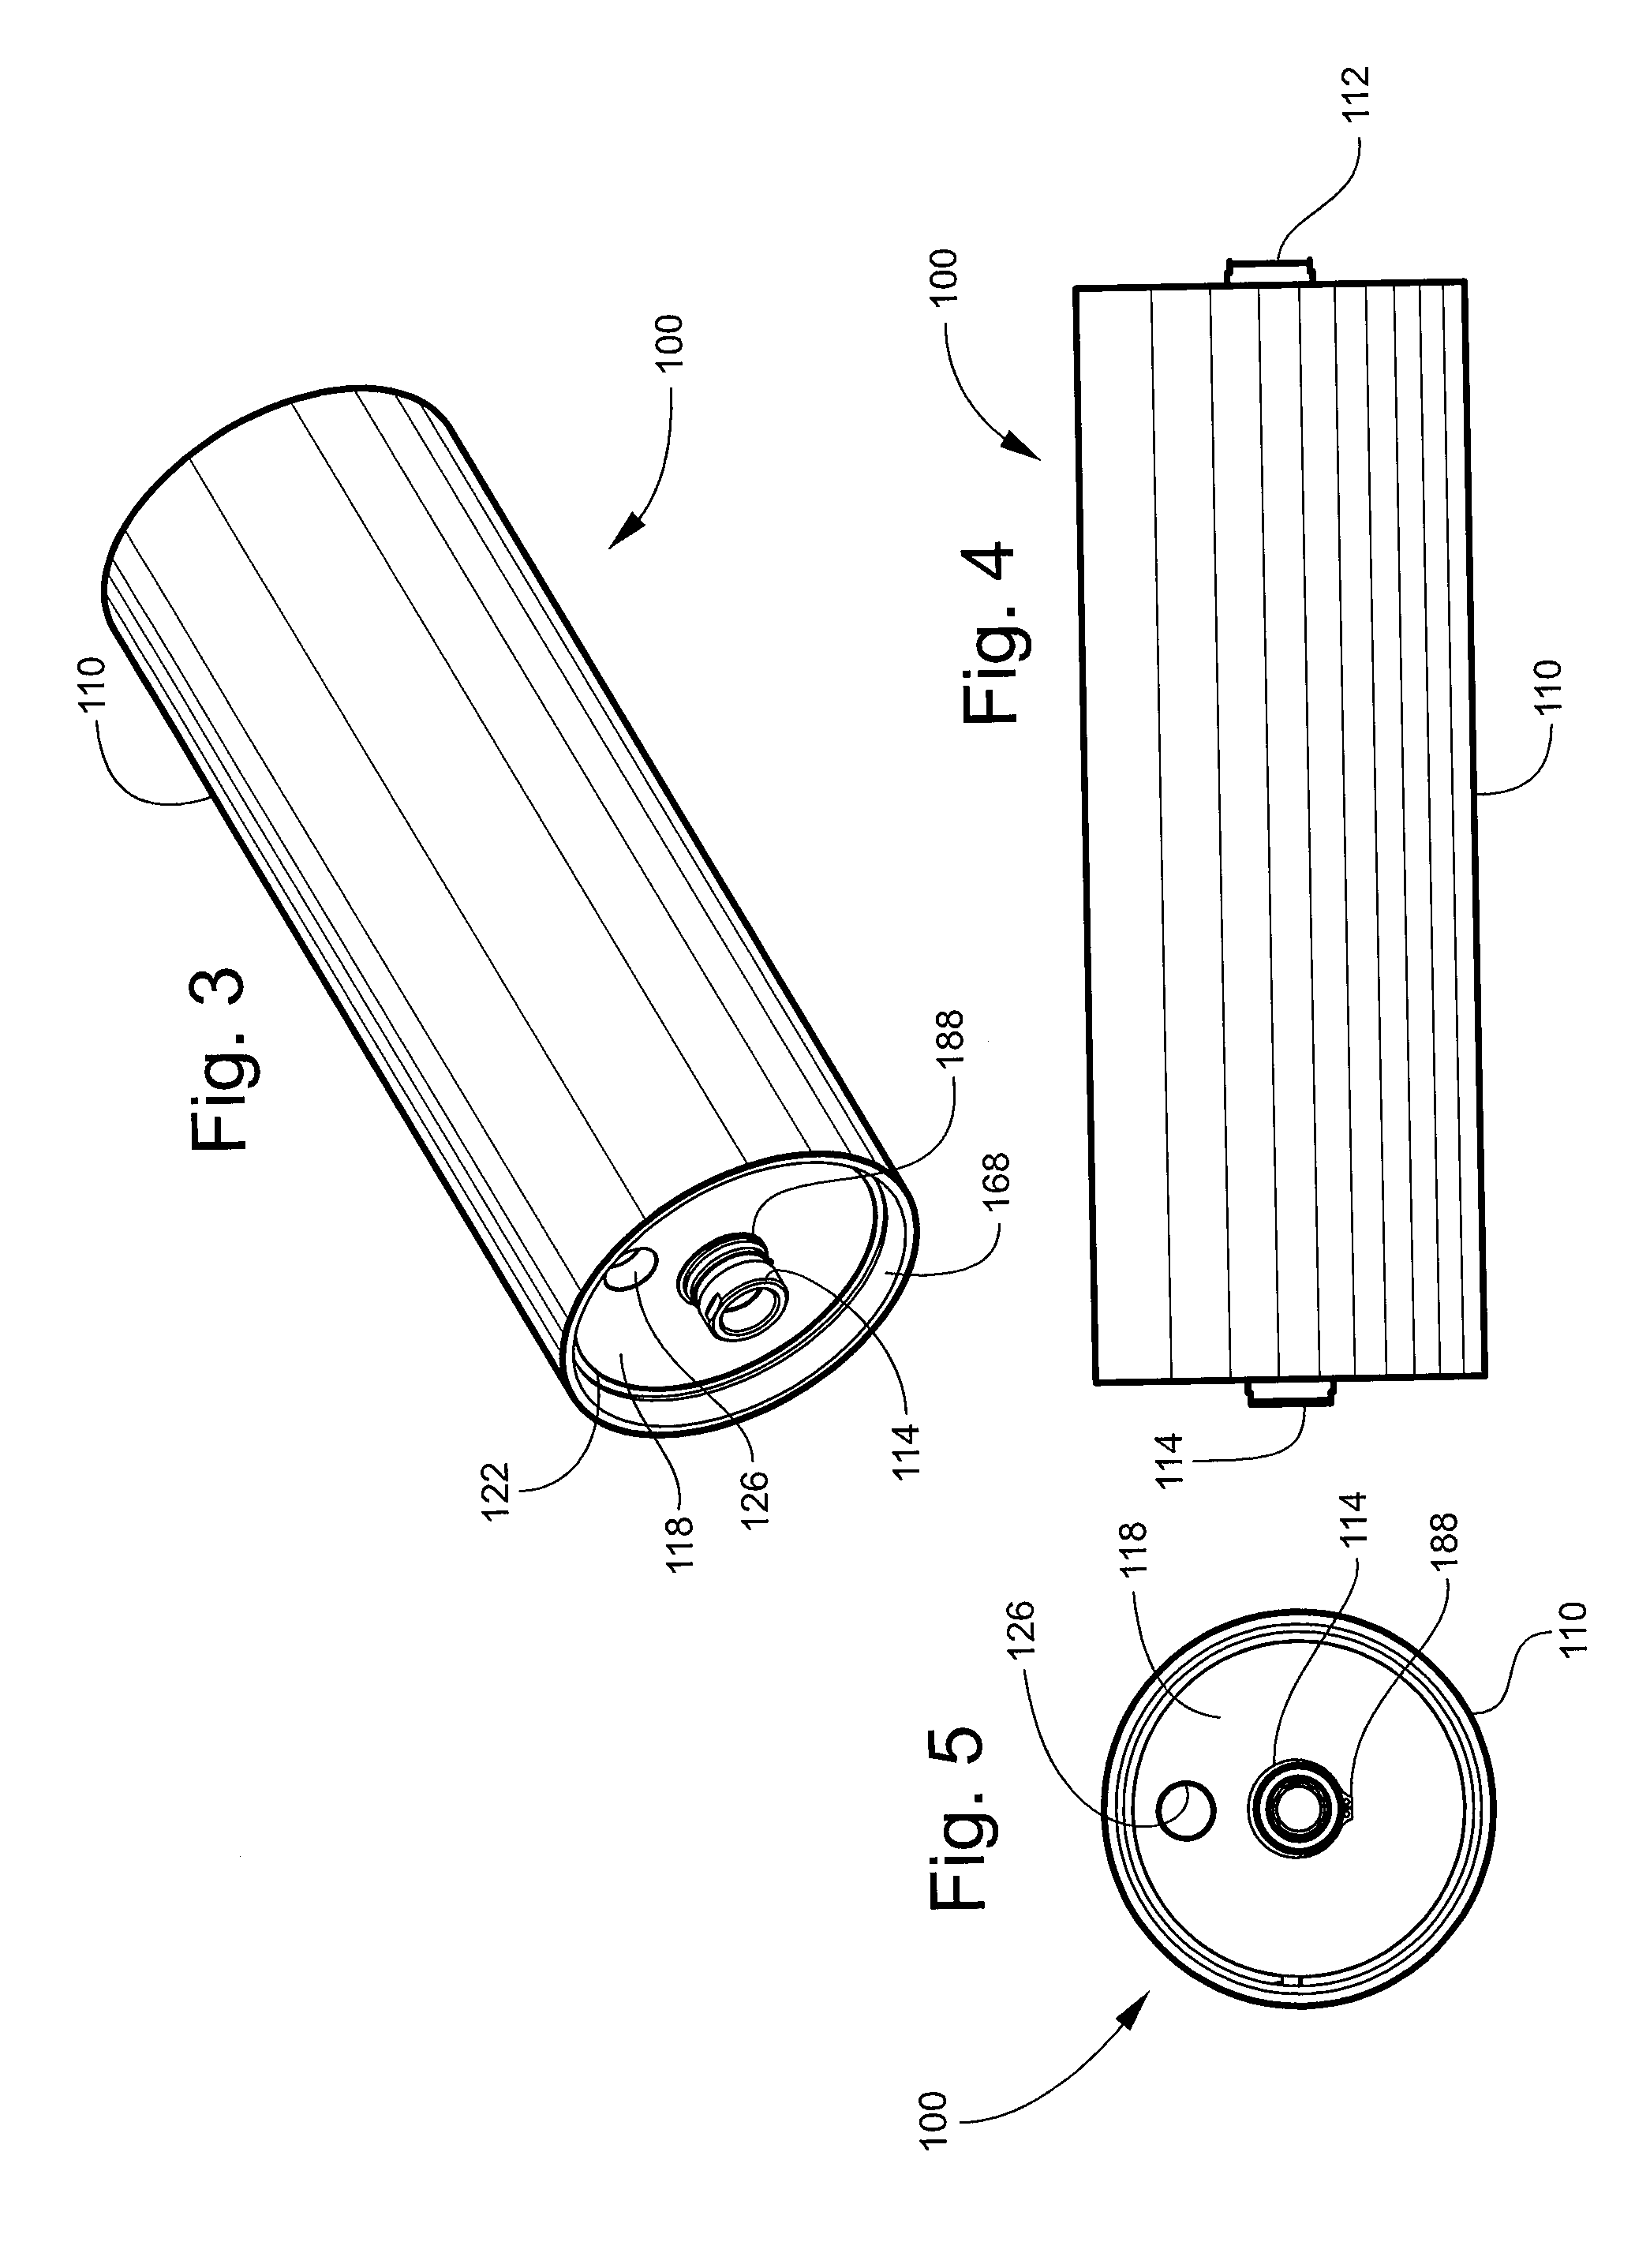 Liquid degassing membrane contactors, components, systems and related methods